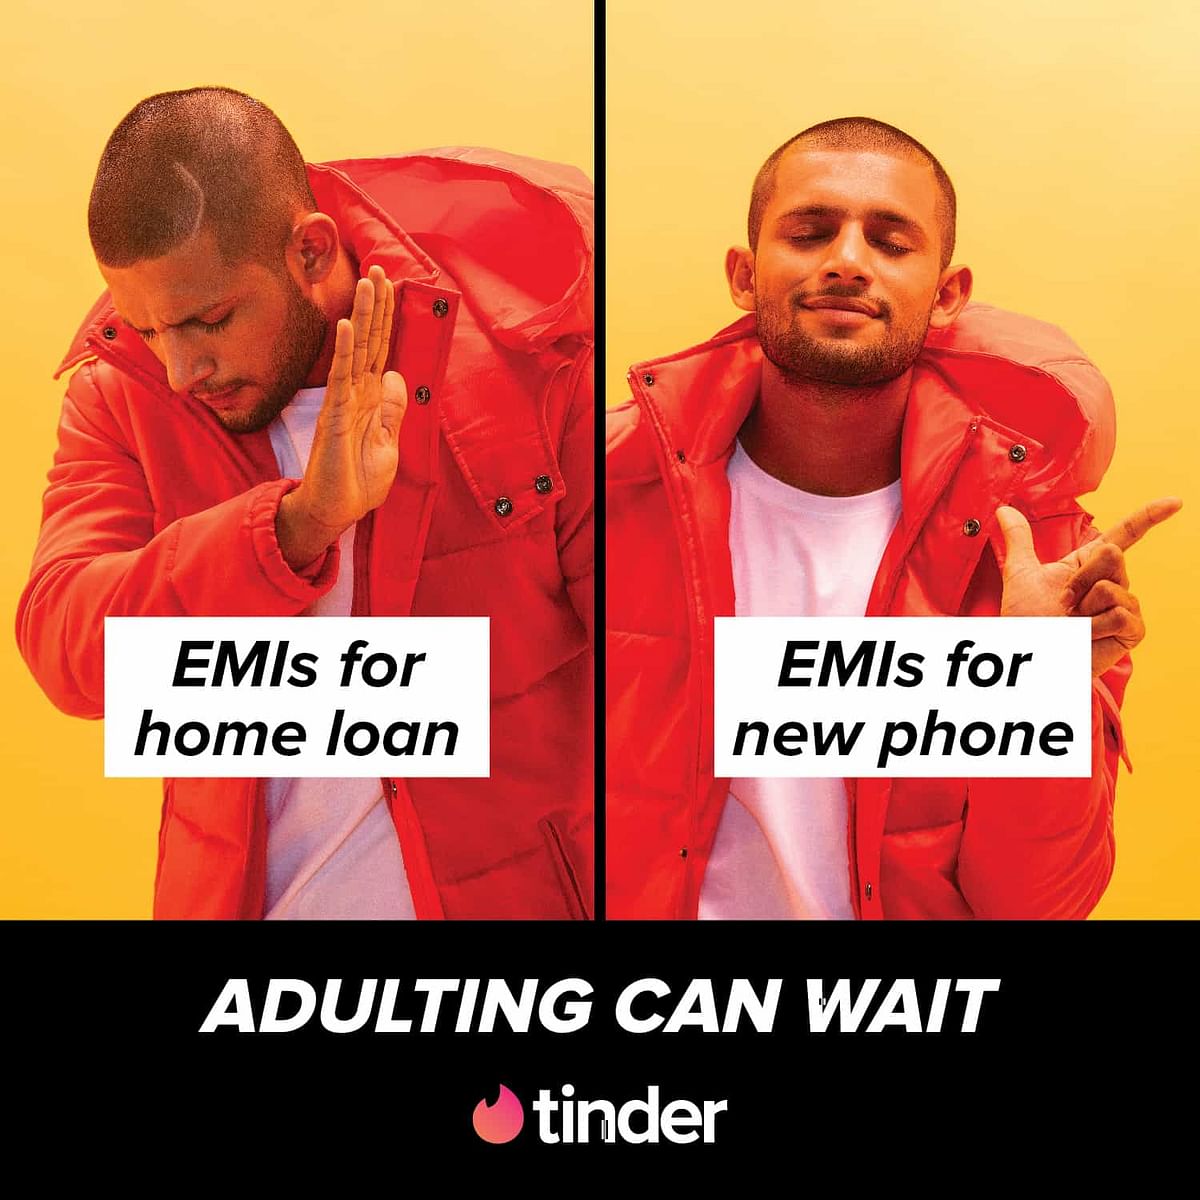 "Adulting can wait" says Tinder in new ads